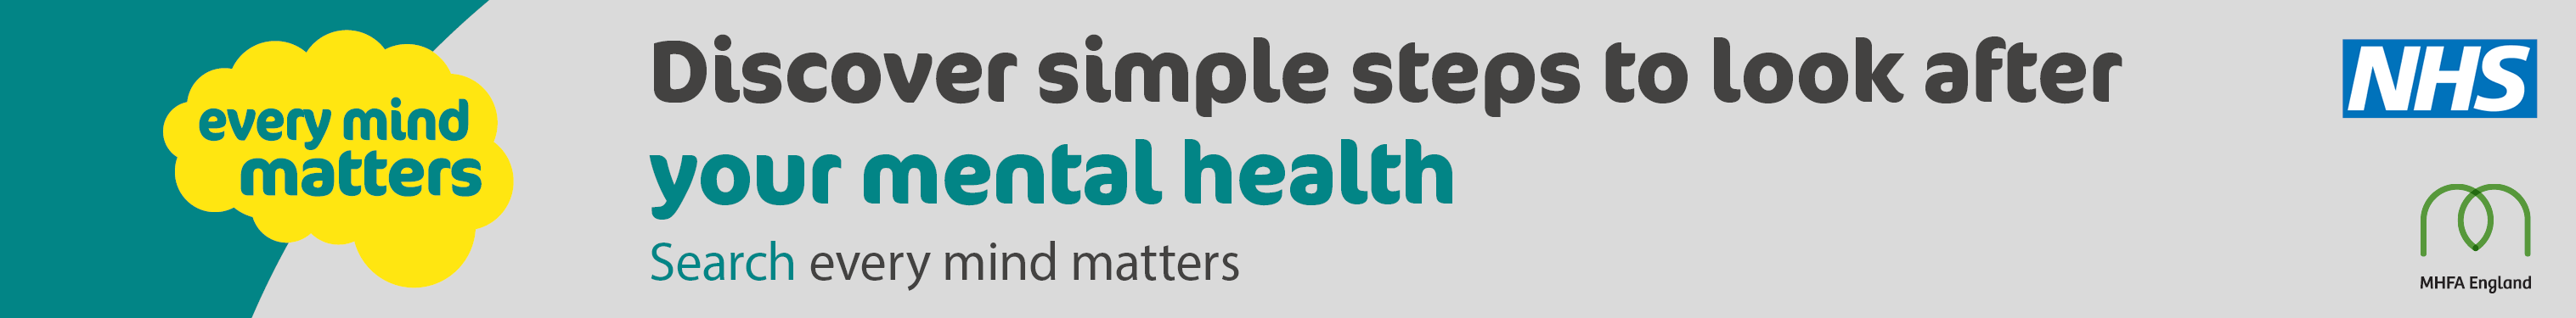 Every Mind Matters MHFA England NHS long banner for email signature